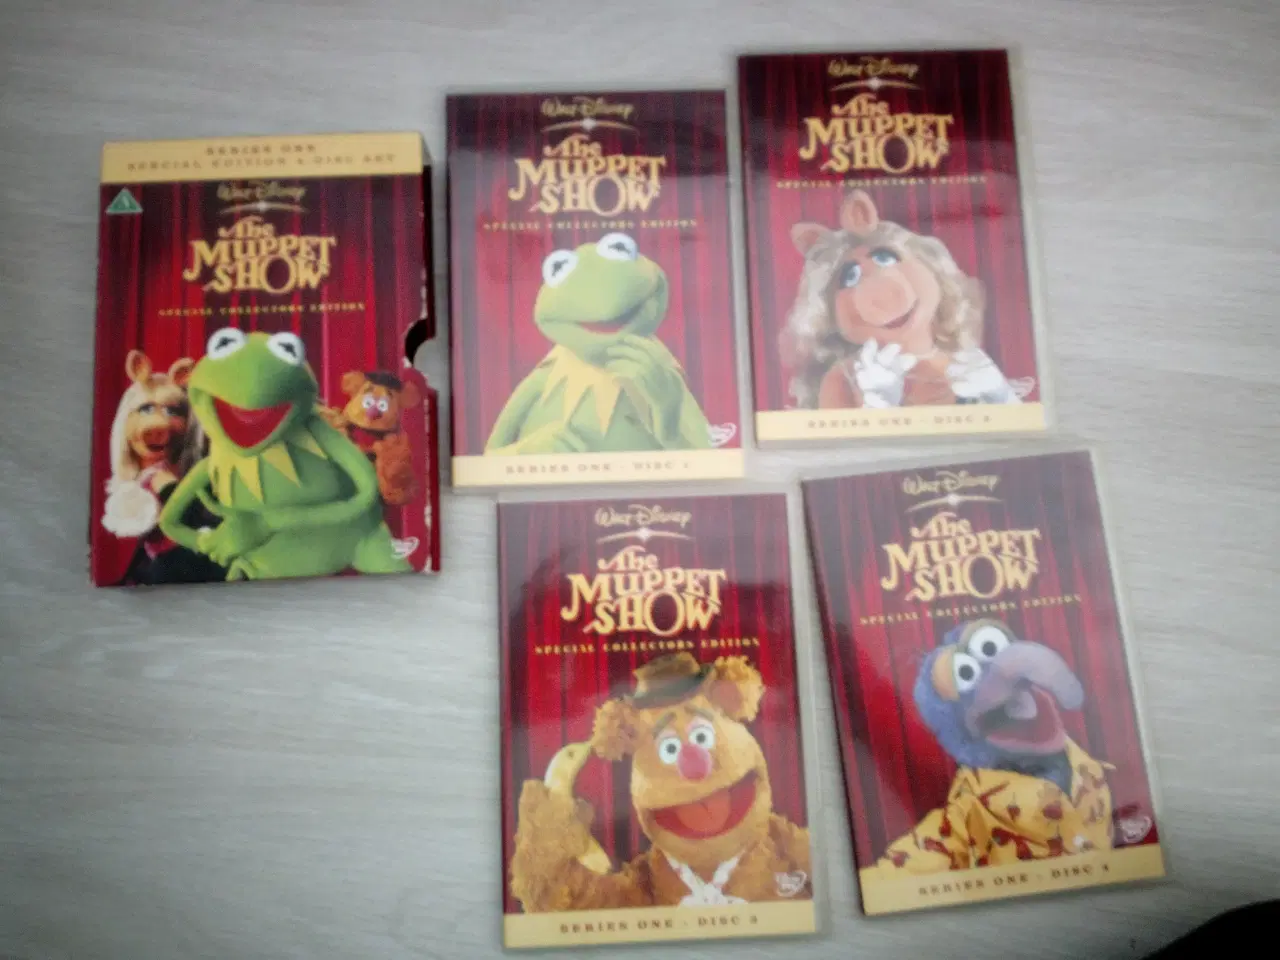 Billede 1 - The Muppet show - serie one